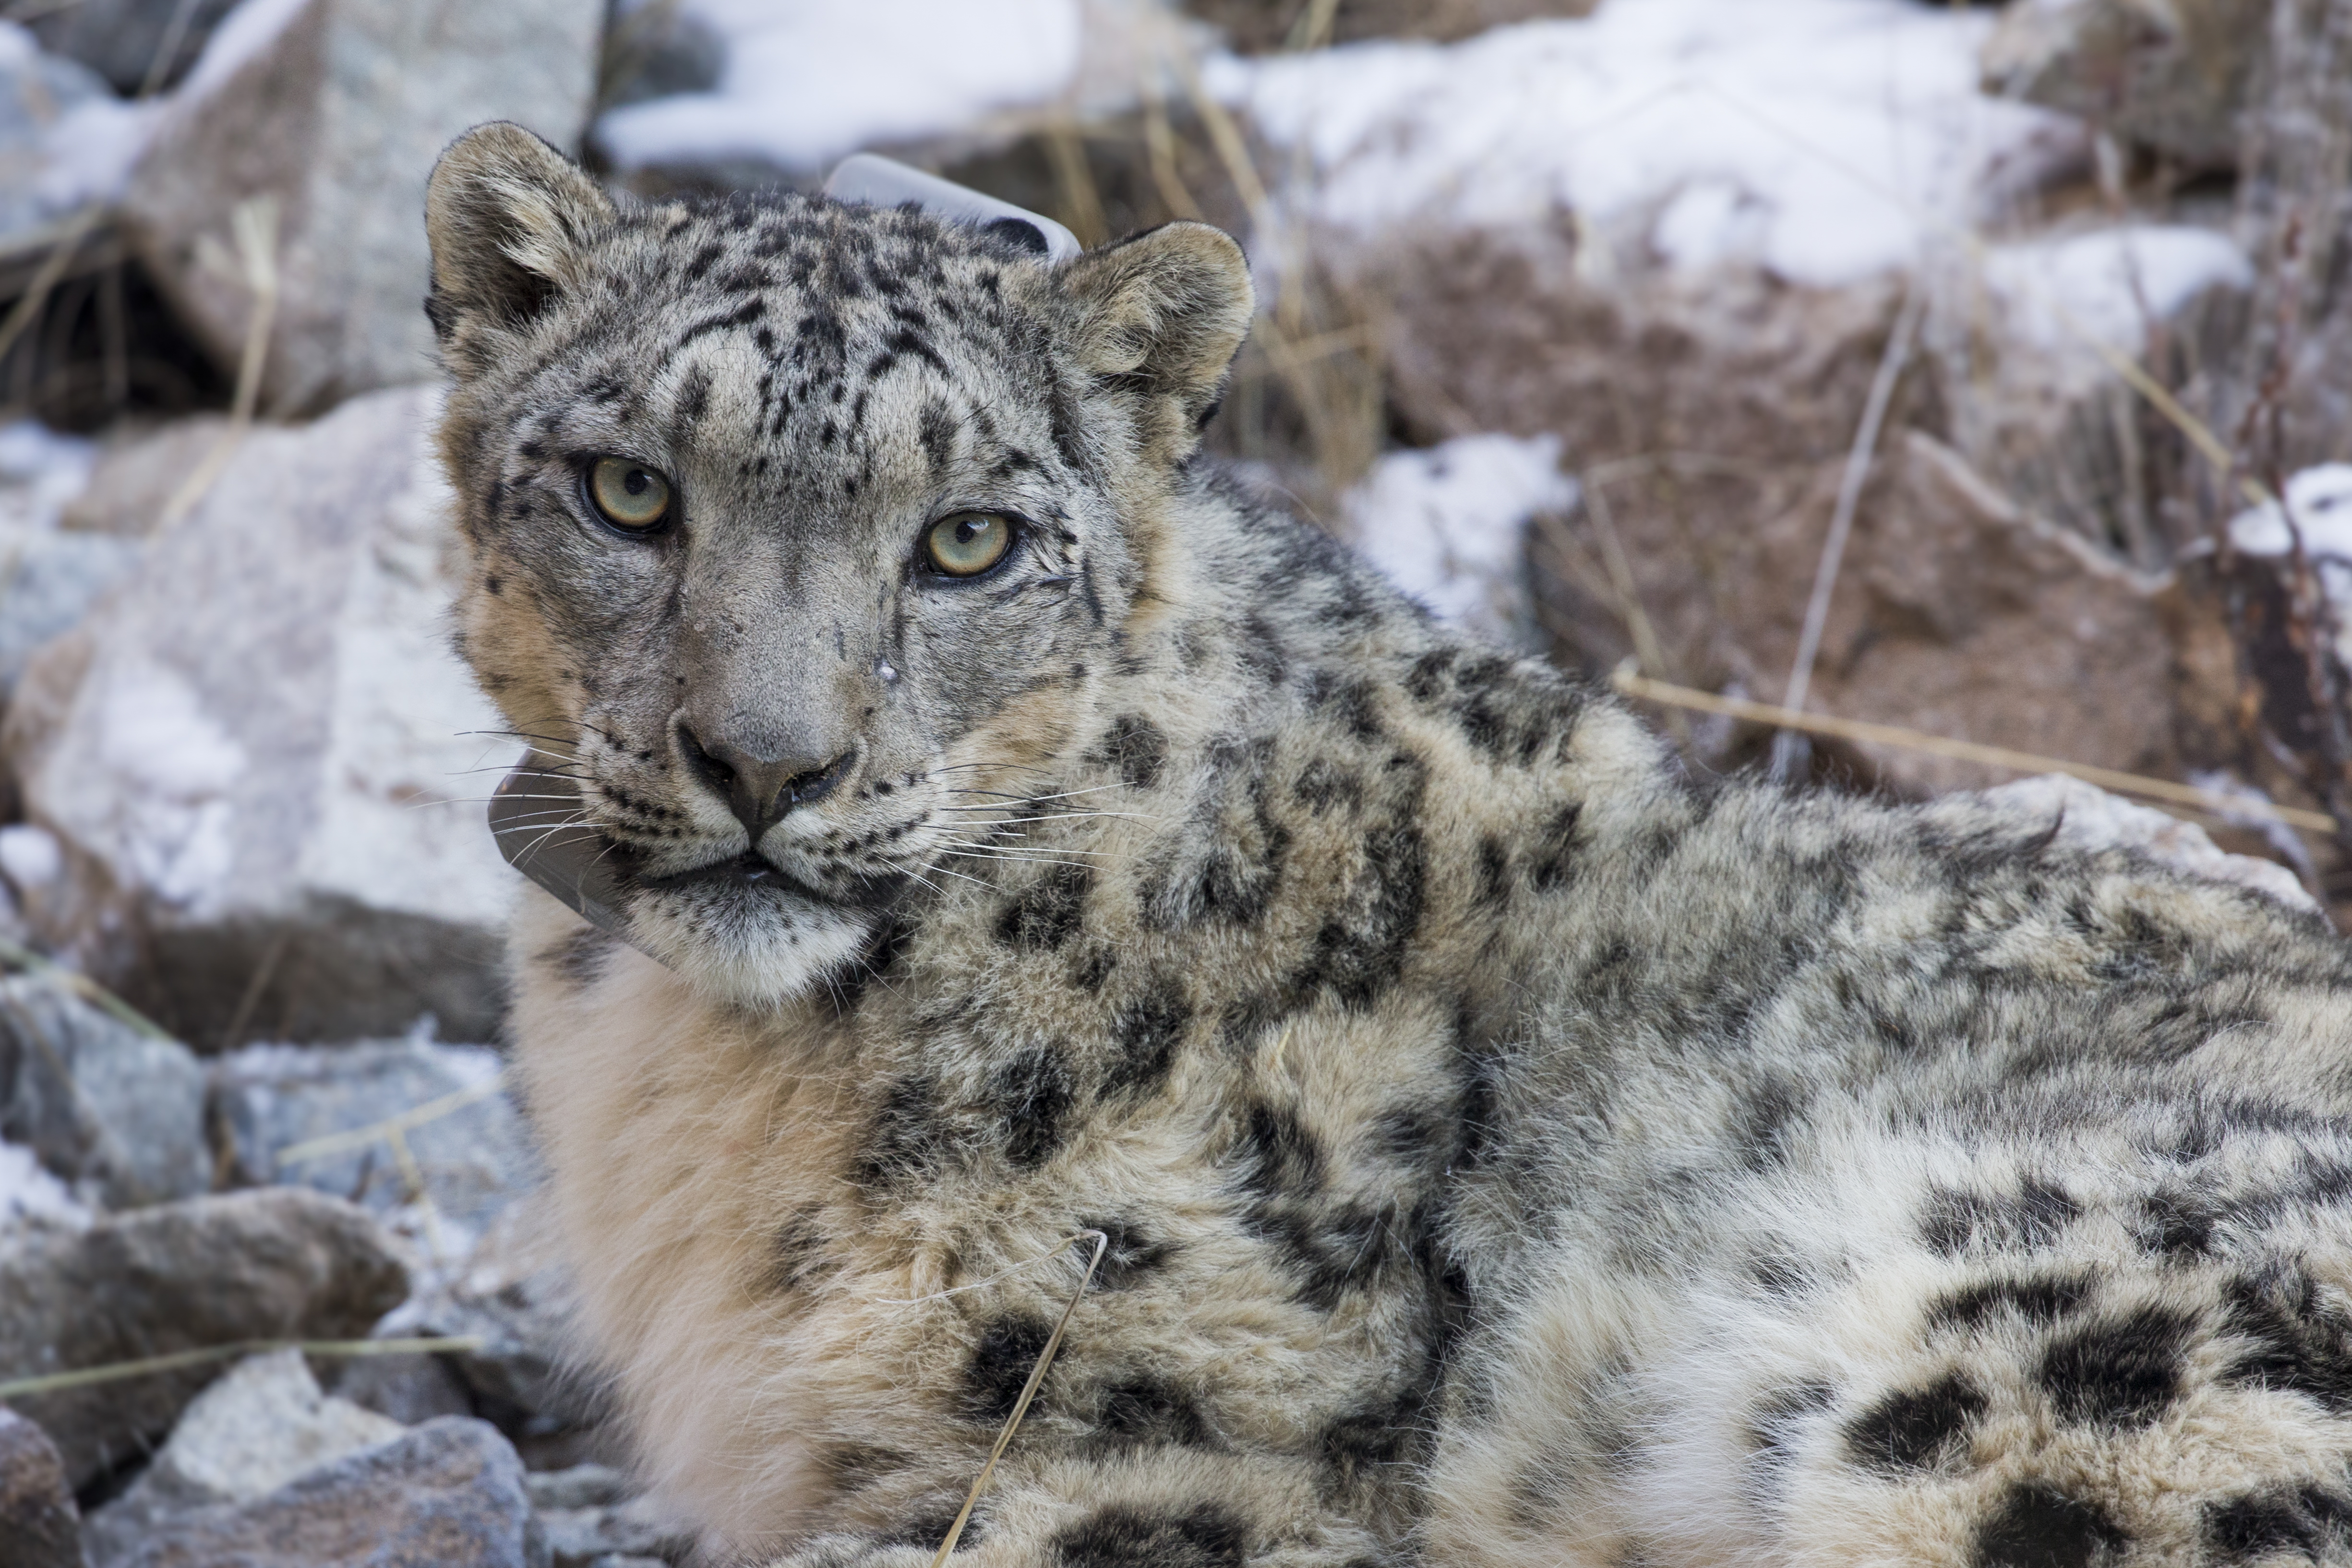 "Snow Leopard male with collar, Sarychat-Ertash Strict Nature Reserve, Tien Shan Mountains, eastern Kyrgyzstan"